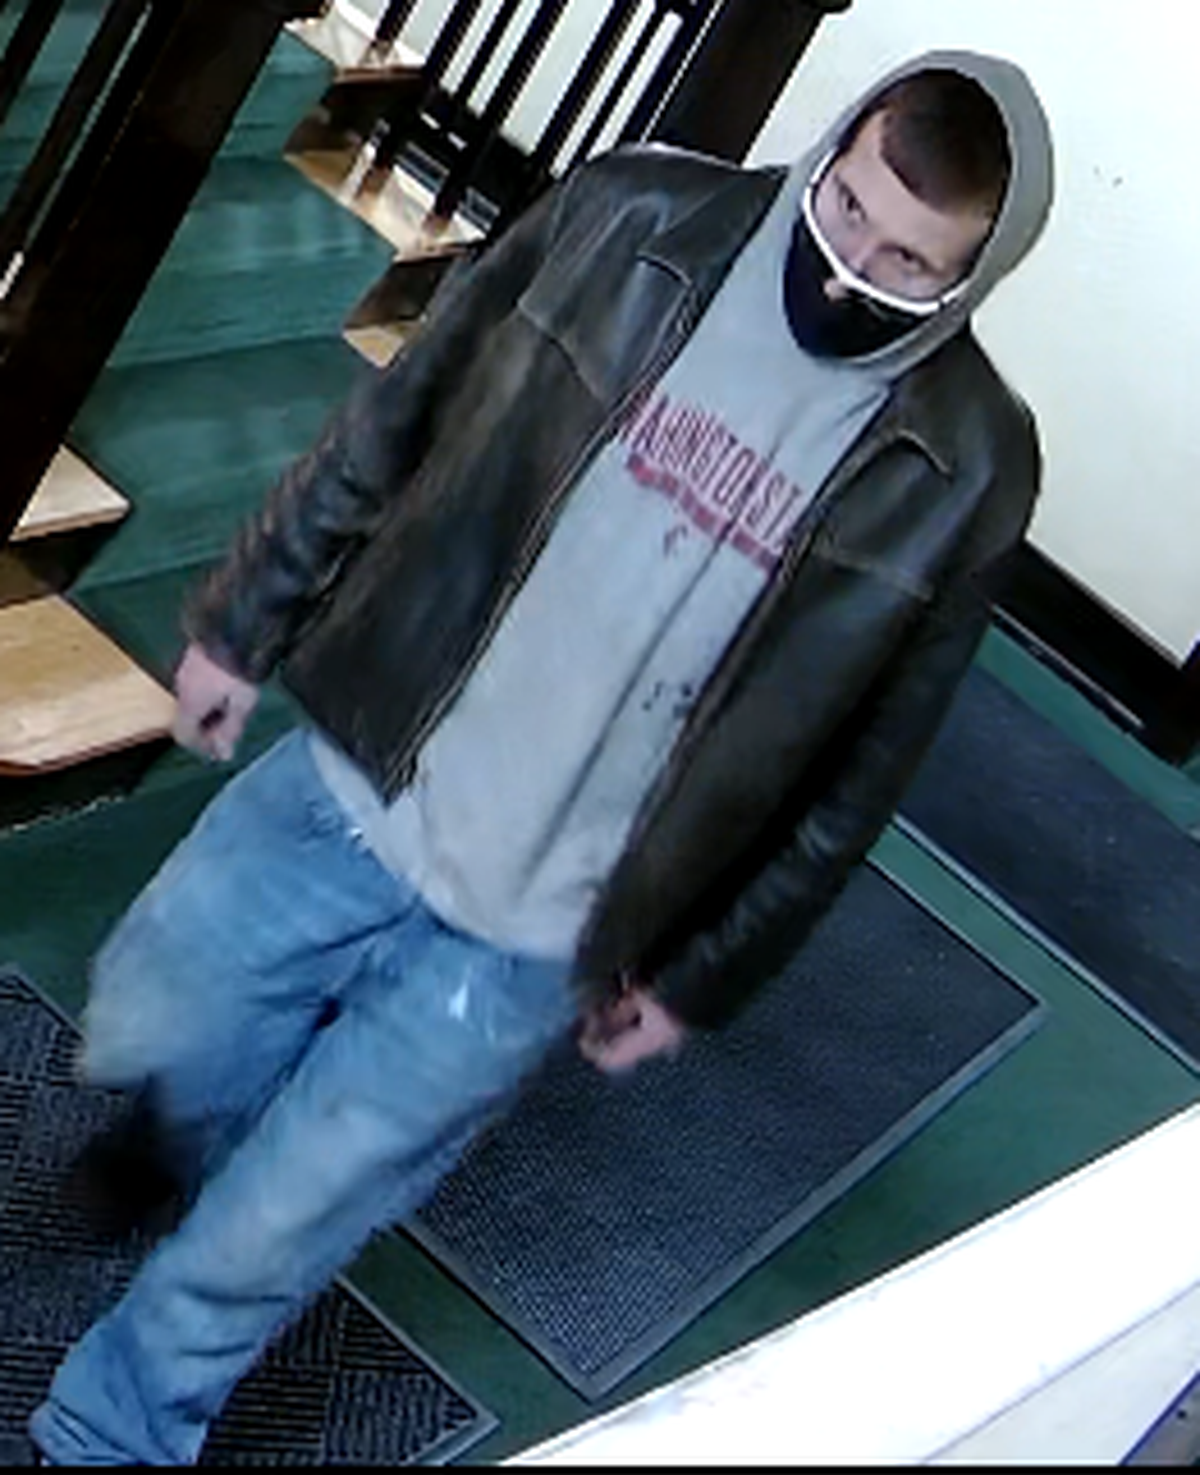 The Spokane Police Department is seeking information regarding the identity of this man, who police said used a crowbar to break into an apartment building on the 700 block of South Bernard Street.  (Courtesy of the Spokane Police Department)